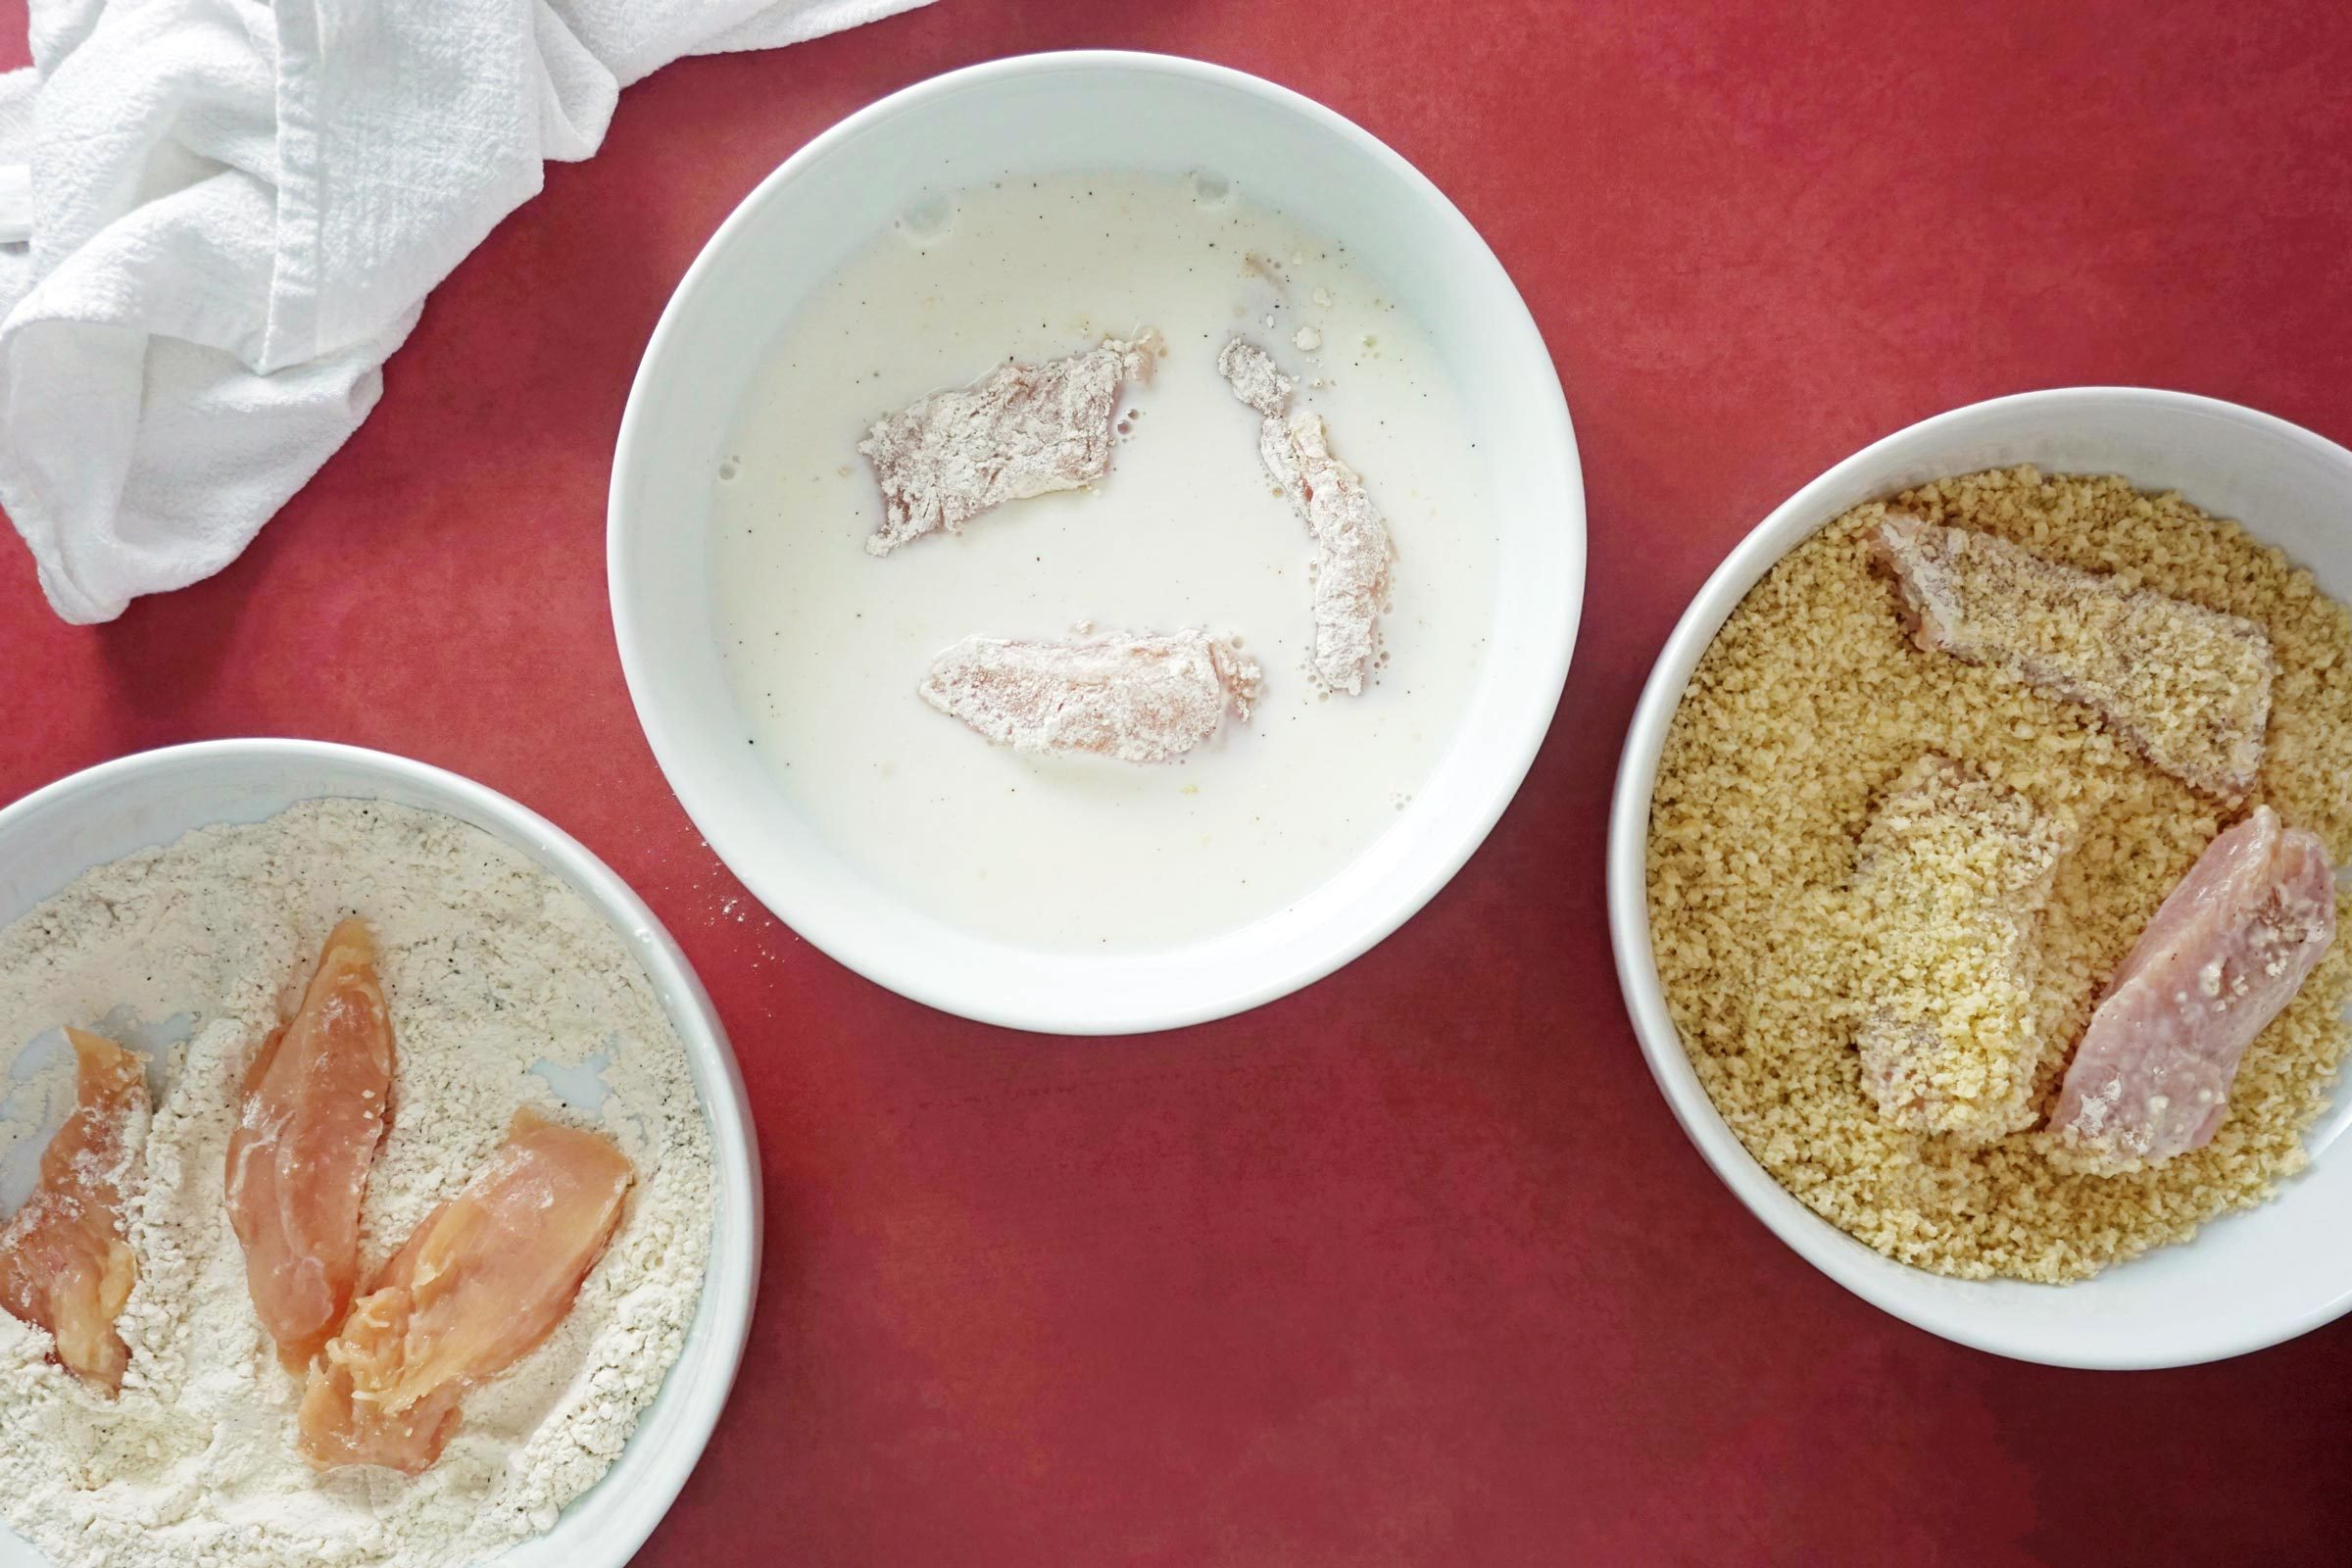 three small bowls with flour, milk and bread crumbs with small pieces of raw chicken in each demonstrating the steps for breading chicken